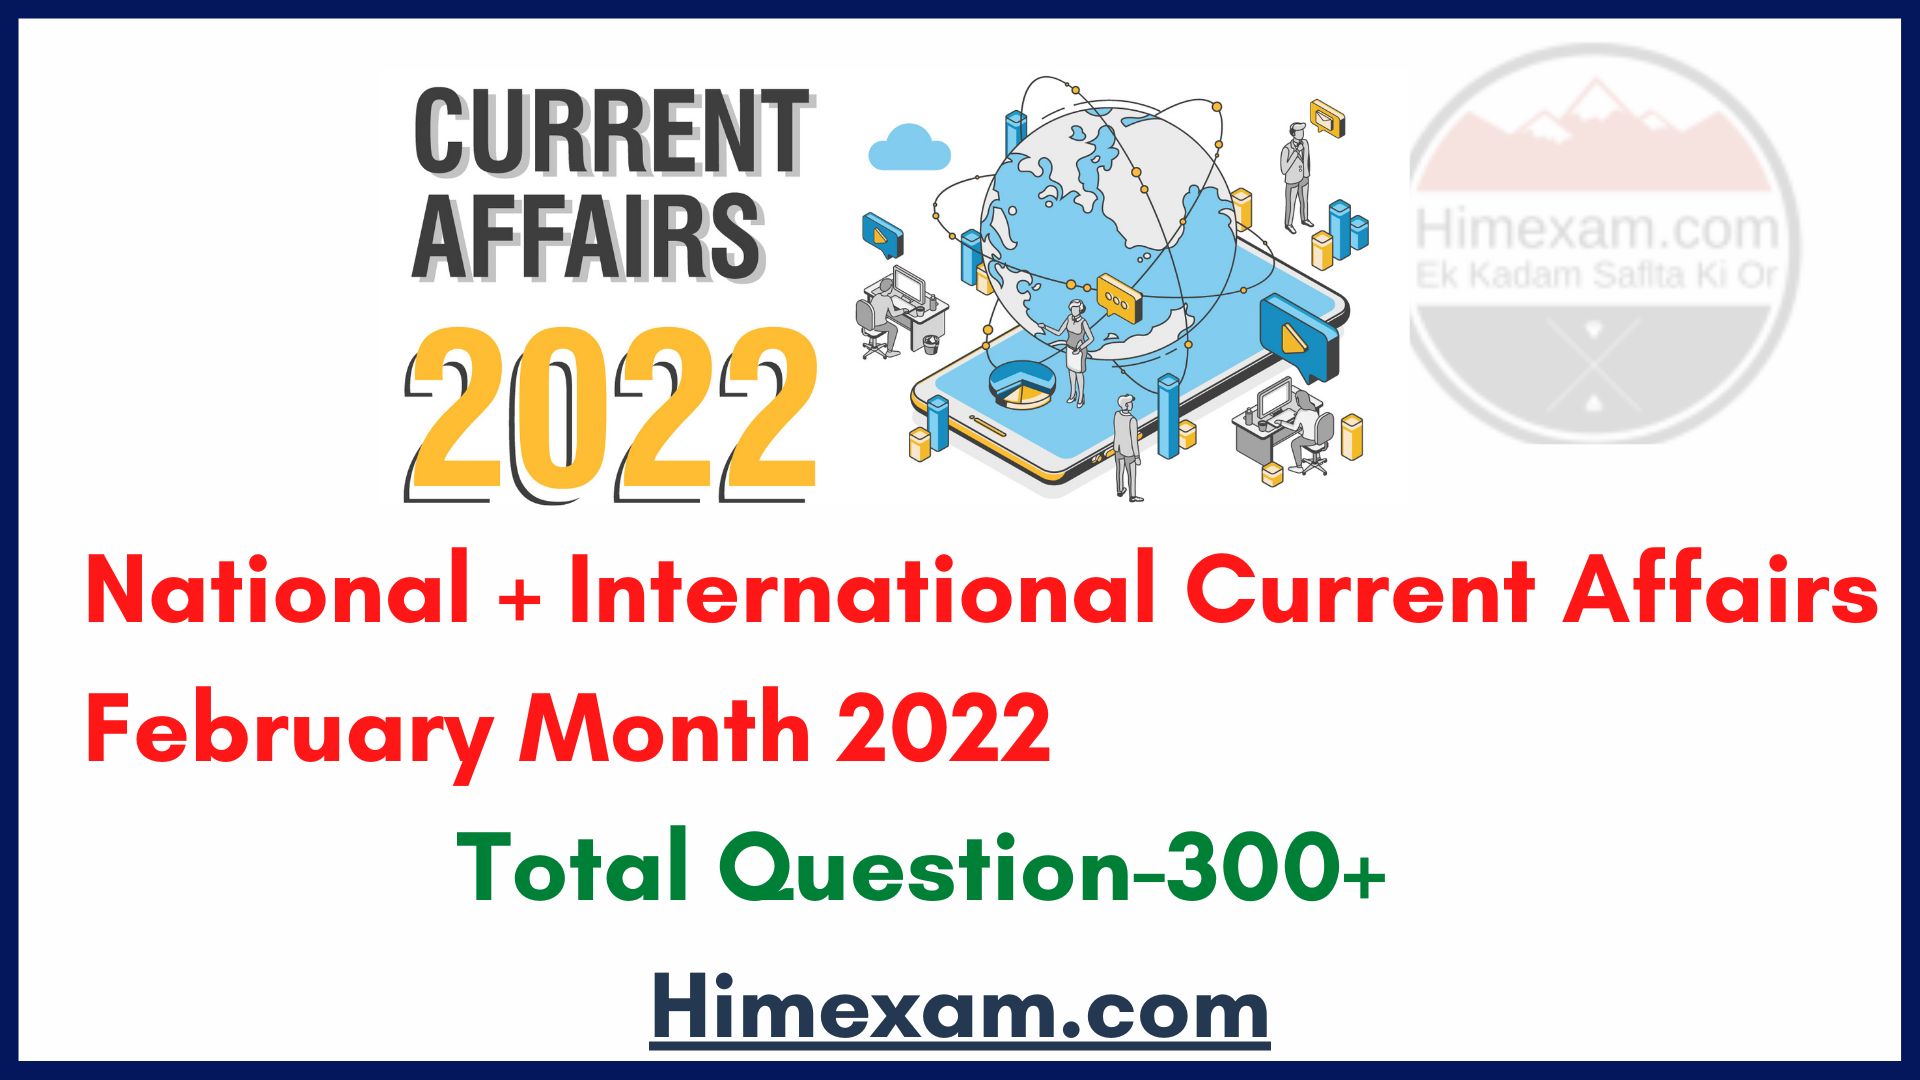 National + International Current Affairs February Month 2022